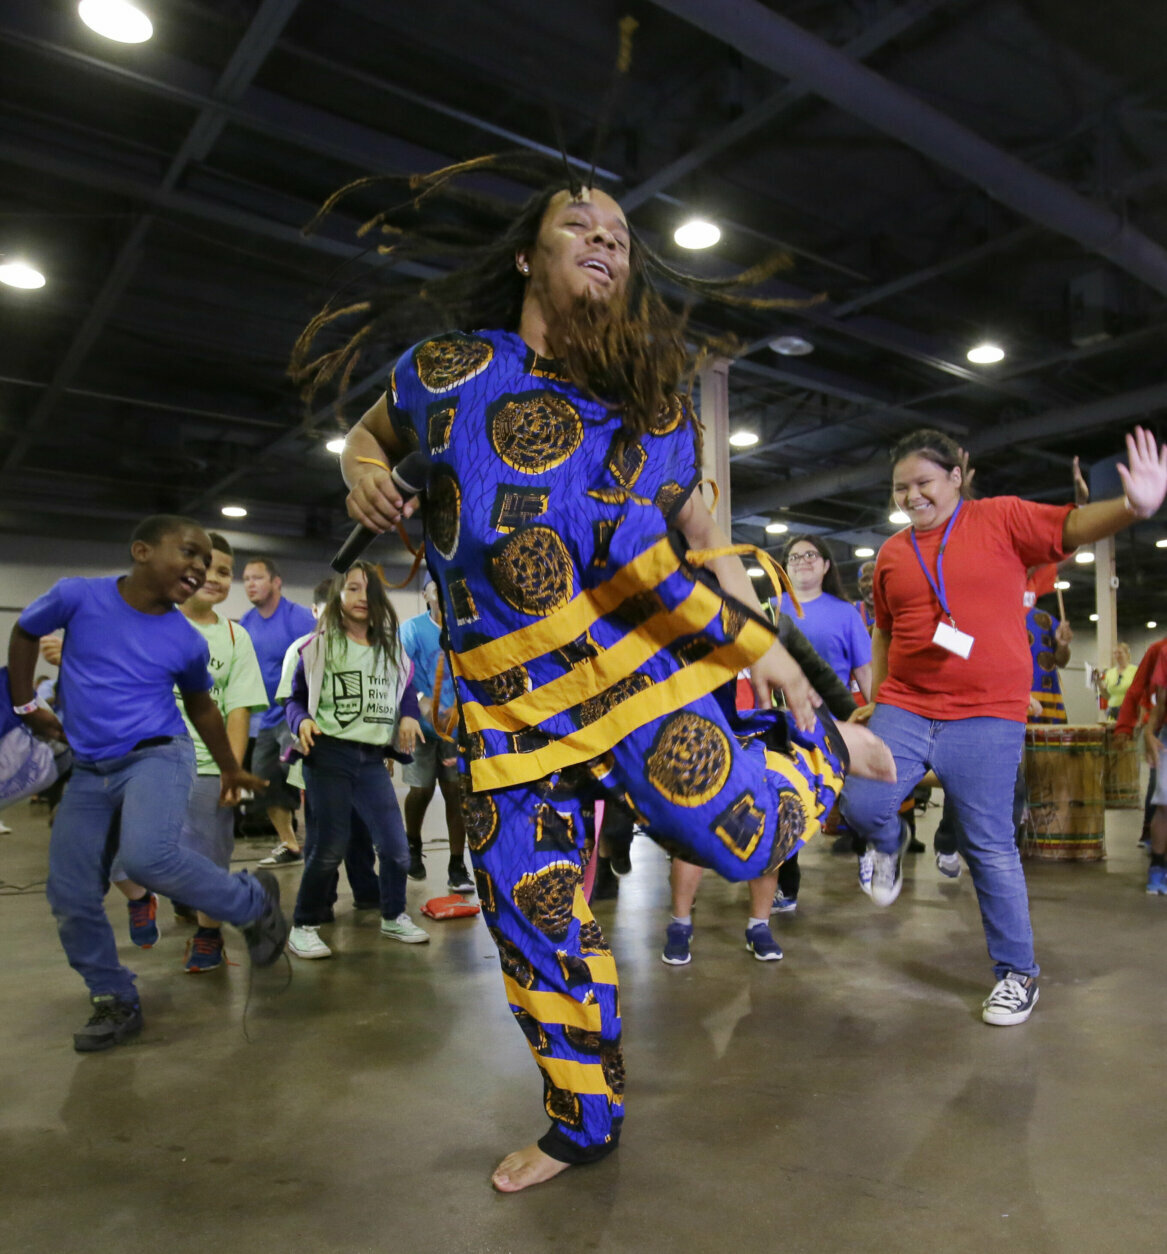 T.J. with the Bandan Koro African Dance Ensemble leads children dancing during a Juneteenth celebration at Fair Park in Dallas, Monday, June 19, 2017. Juneteenth celebrates the end of slavery in Texas. (AP Photo/LM Otero)